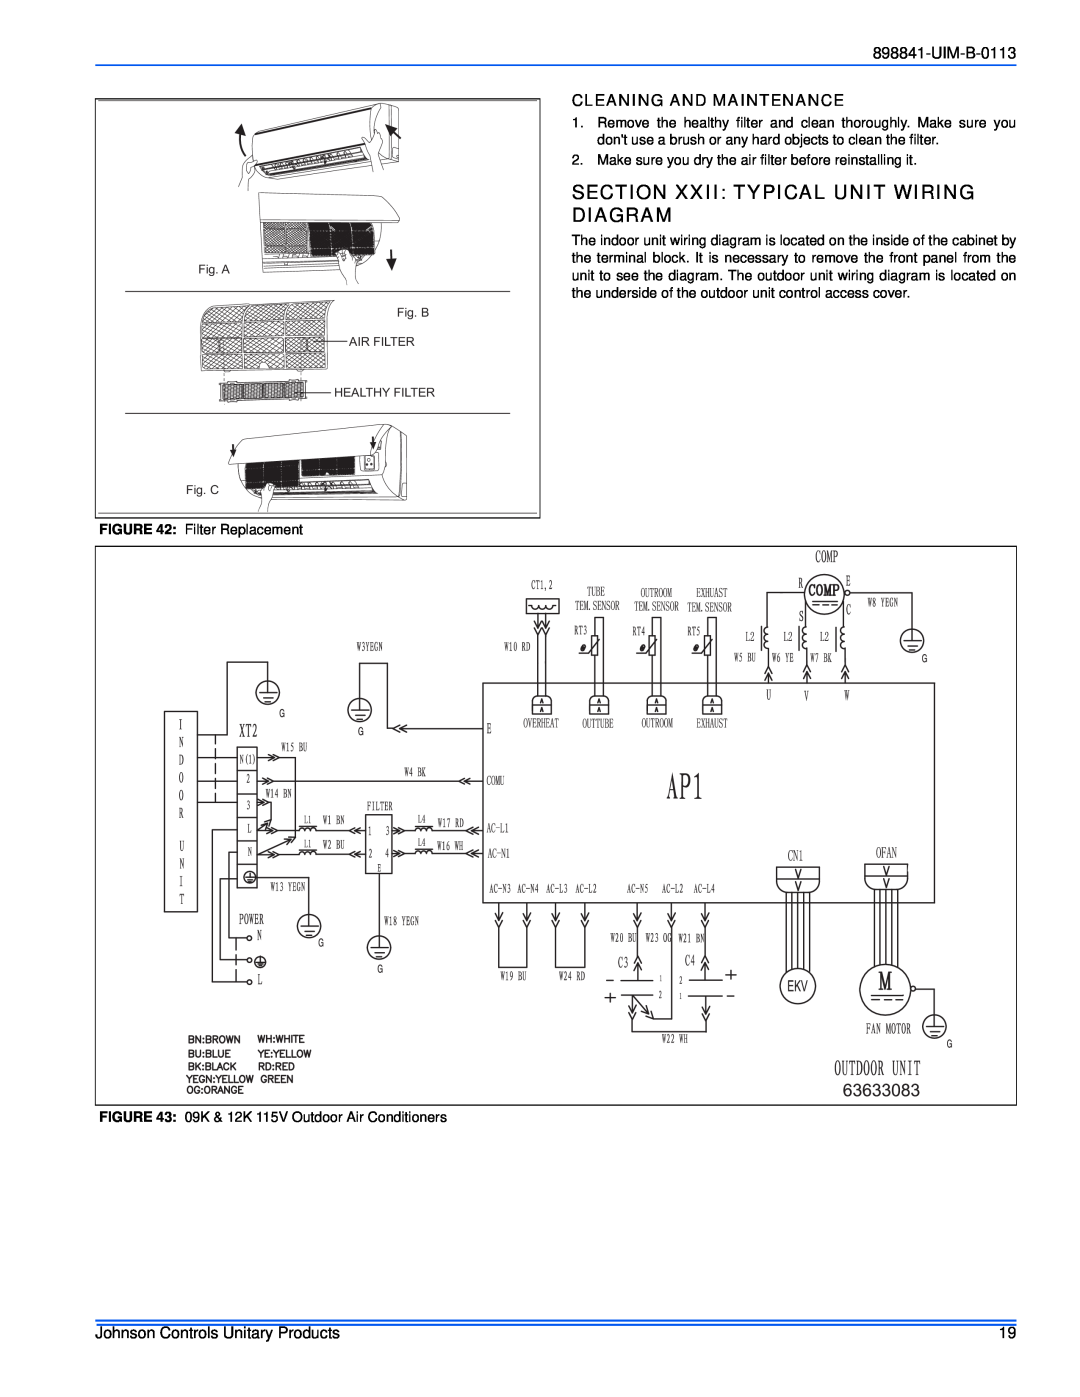 Johnson Controls 22 SEER installation manual Section Xxii Typical Unit Wiring Diagram, Cleaning And Maintenance, UIM-B-0113 